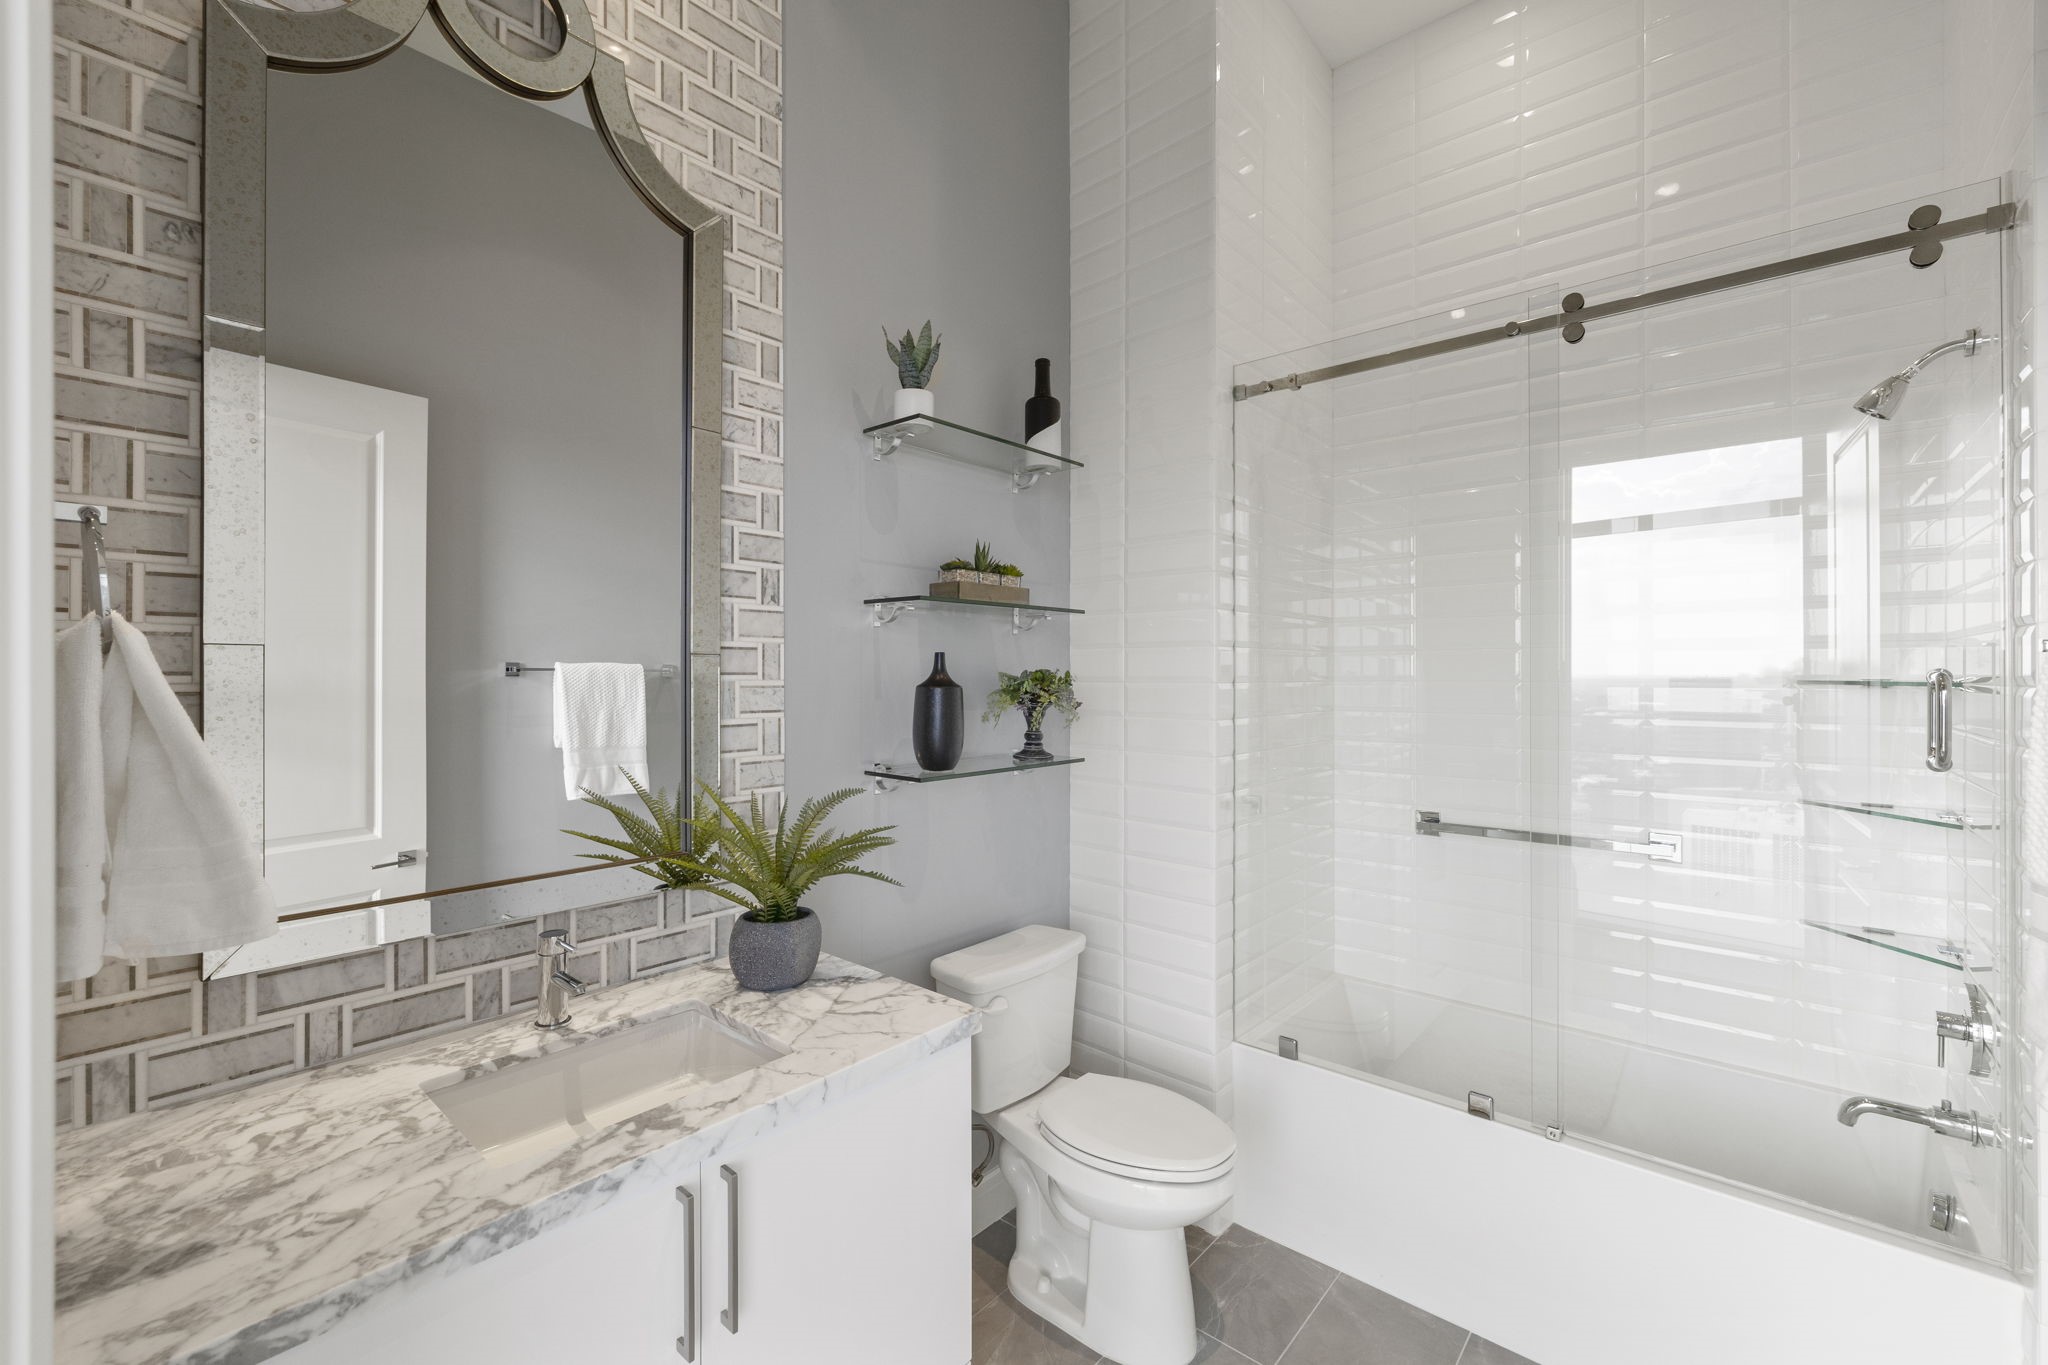 Welcome to a third en-suite bathroom that embodies both comfort and style. The tile floors and tub/shower combo with a tile surround make this space a functional and elegant addition to your home.